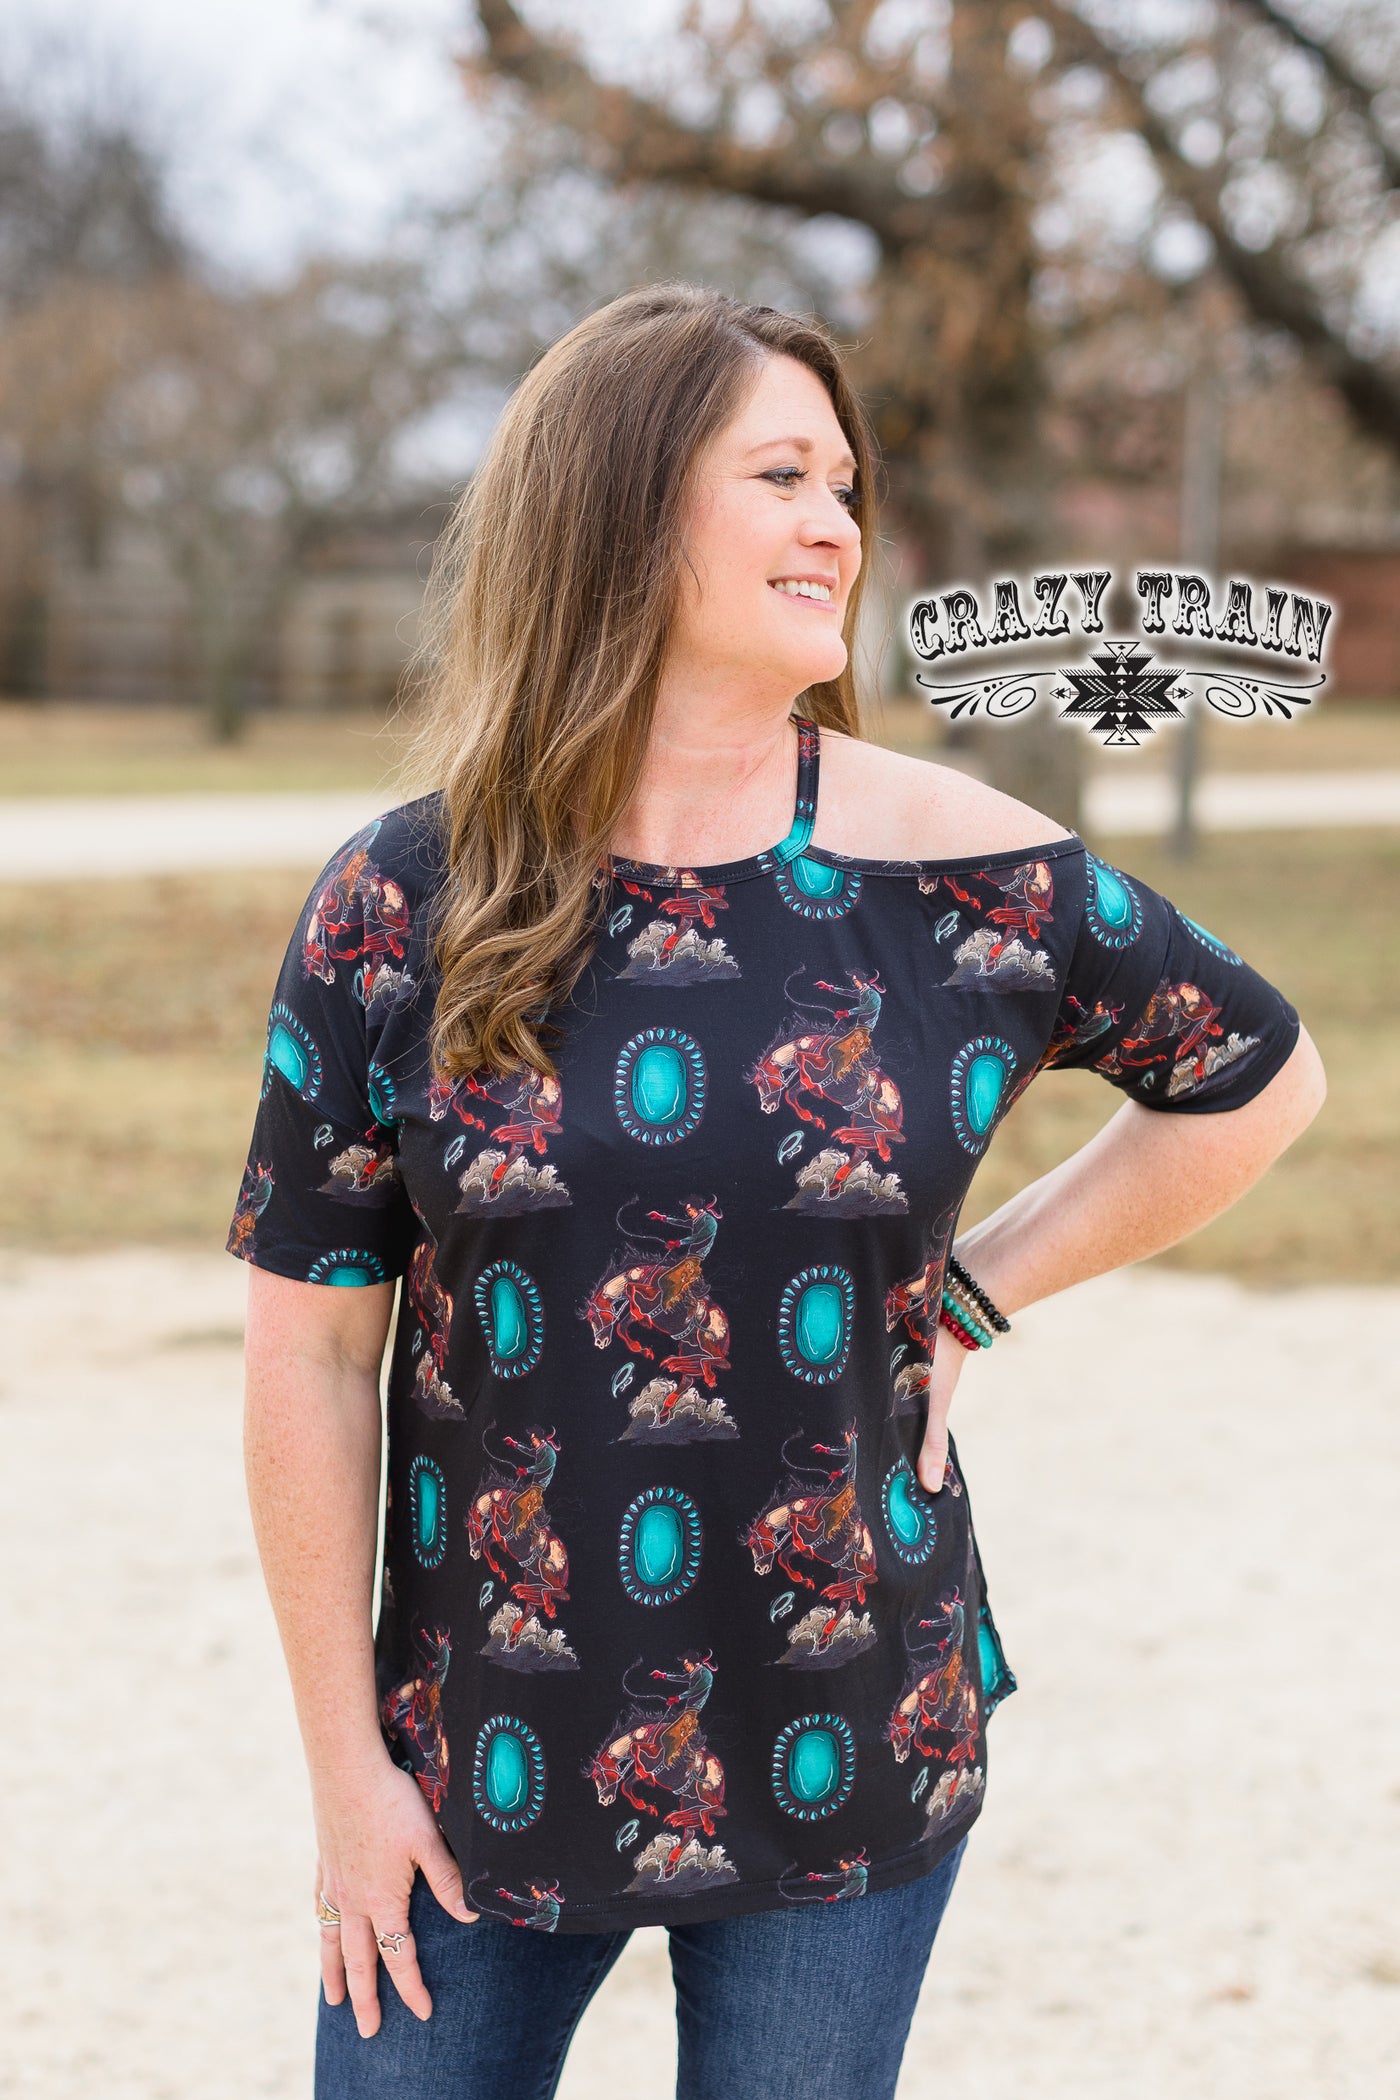 short sleeve top  Concho Cowboy Top from Crazy Train Clothing